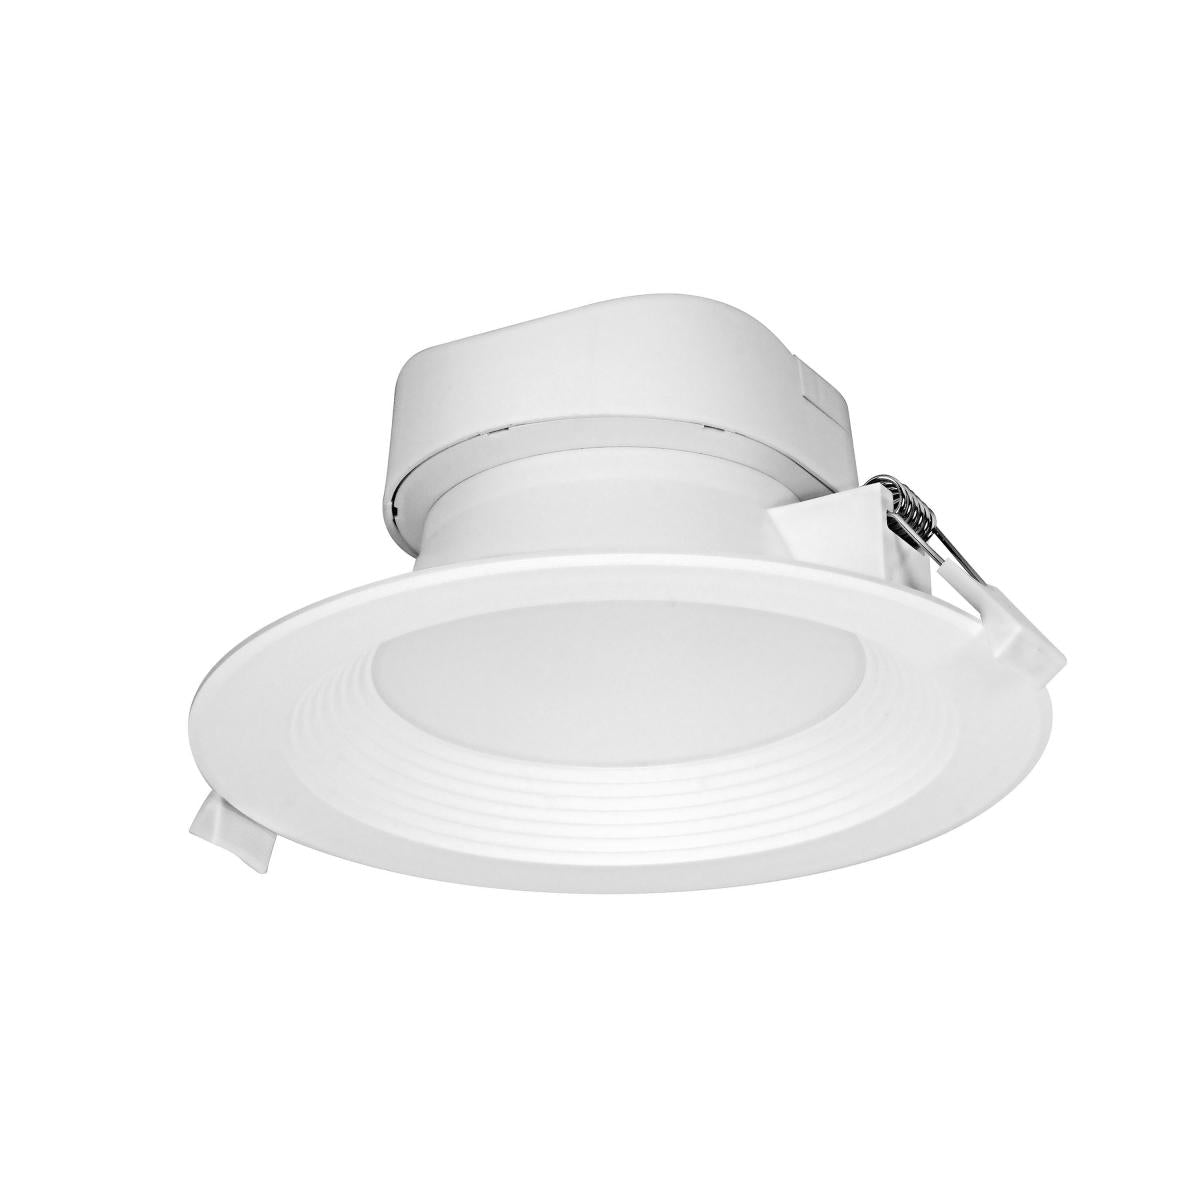 Satco S39027 9 watt LED Direct Wire Downlight 5-6 inch 3000K 120 volt Dimmable